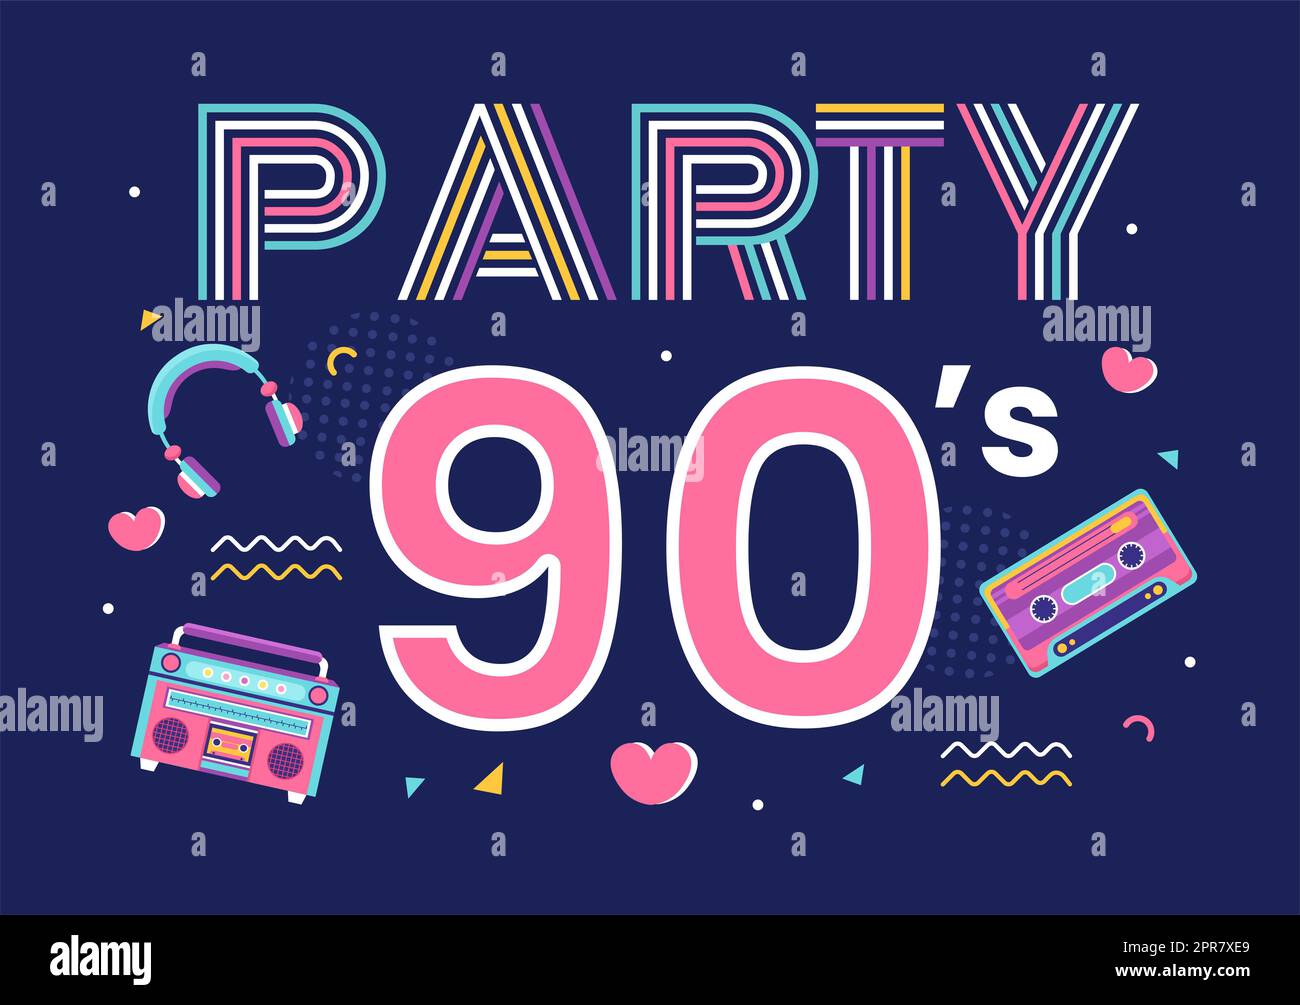 90s Retro Party Cartoon Background Illustration with Nineties Music, Sneakers, Radio, Dance Time and Tape Cassette in Trendy Flat Style Design Stock Photo